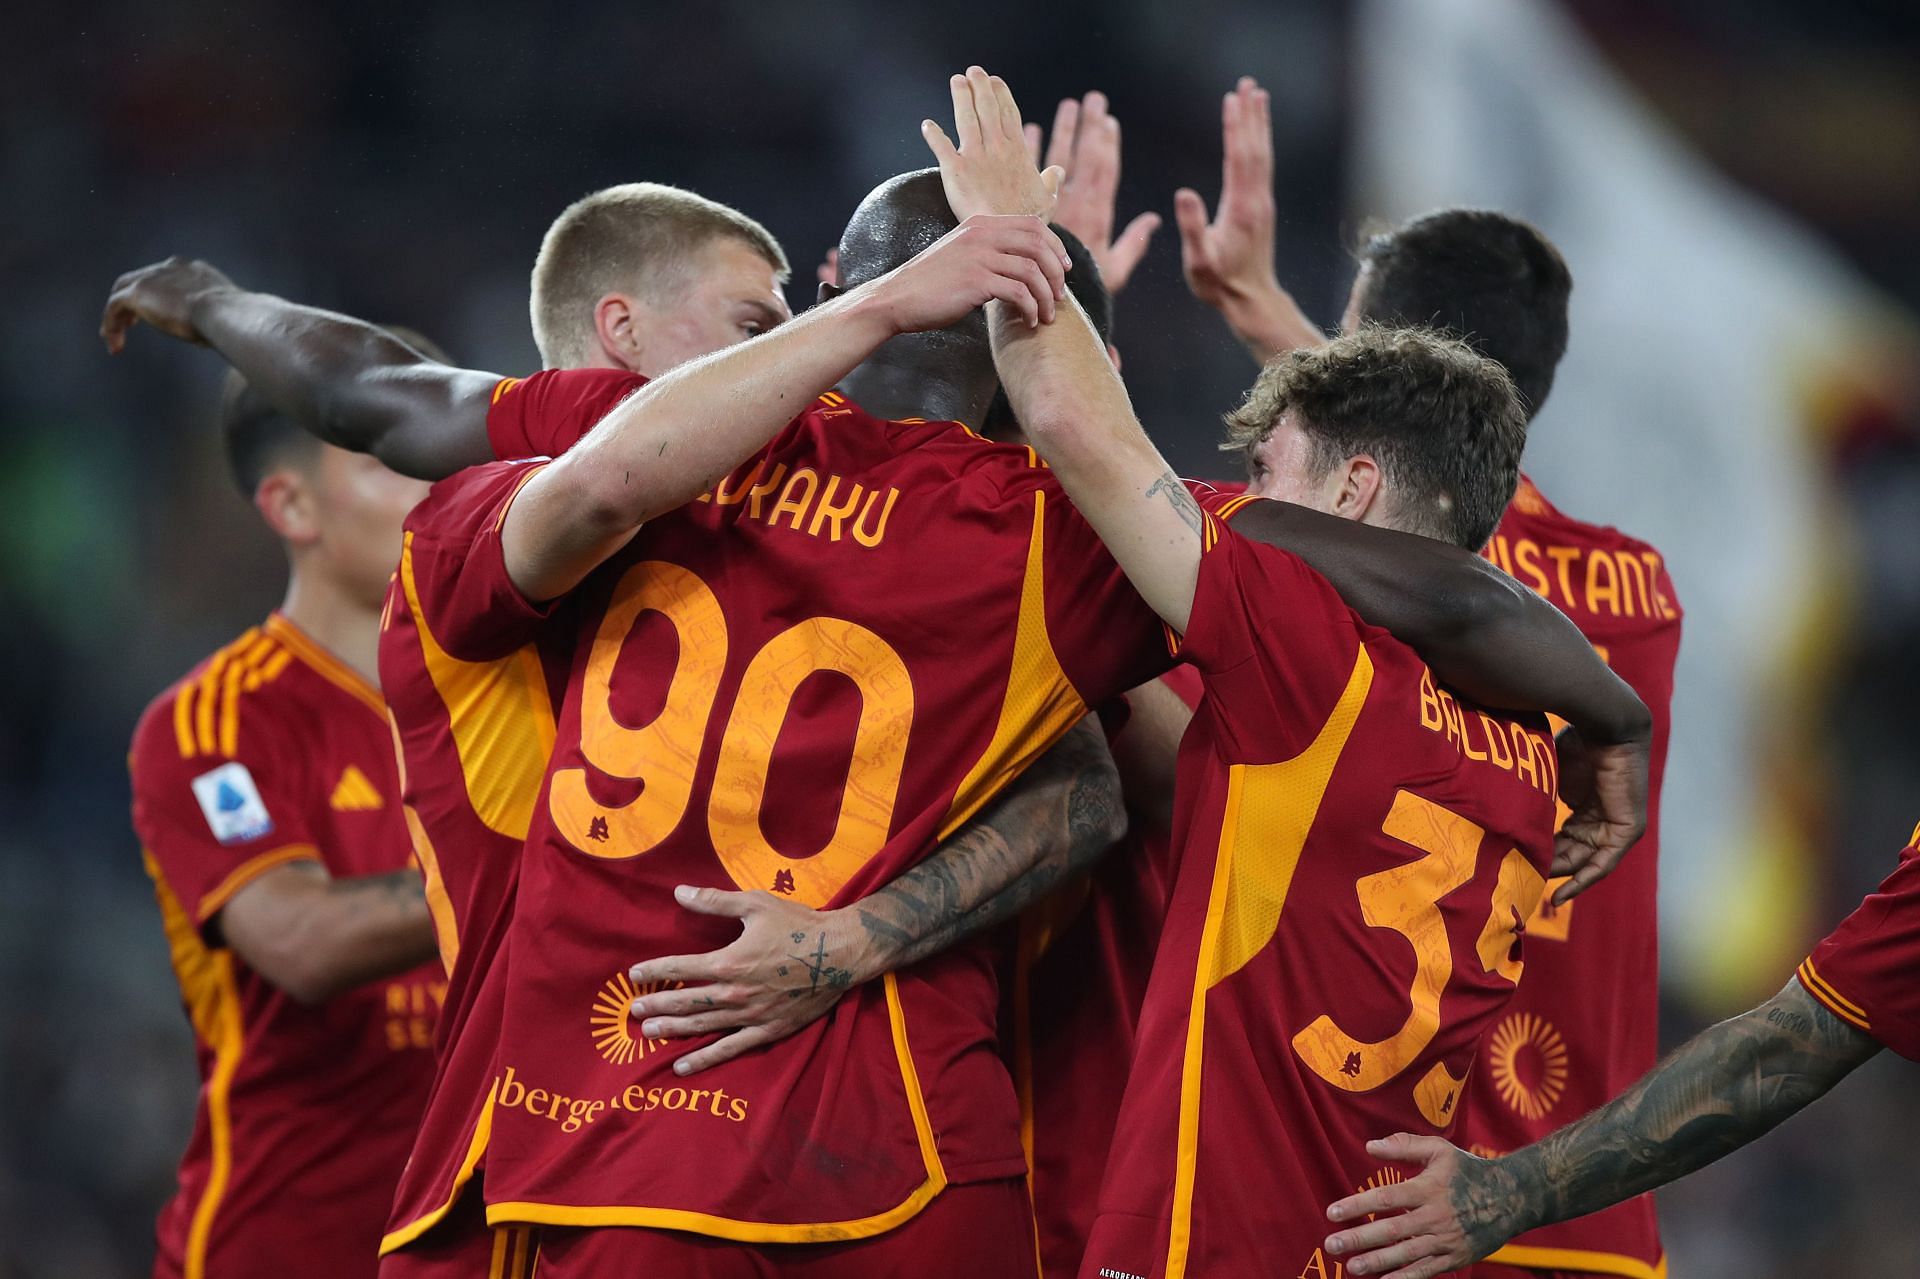 AS Roma have good players in their ranks